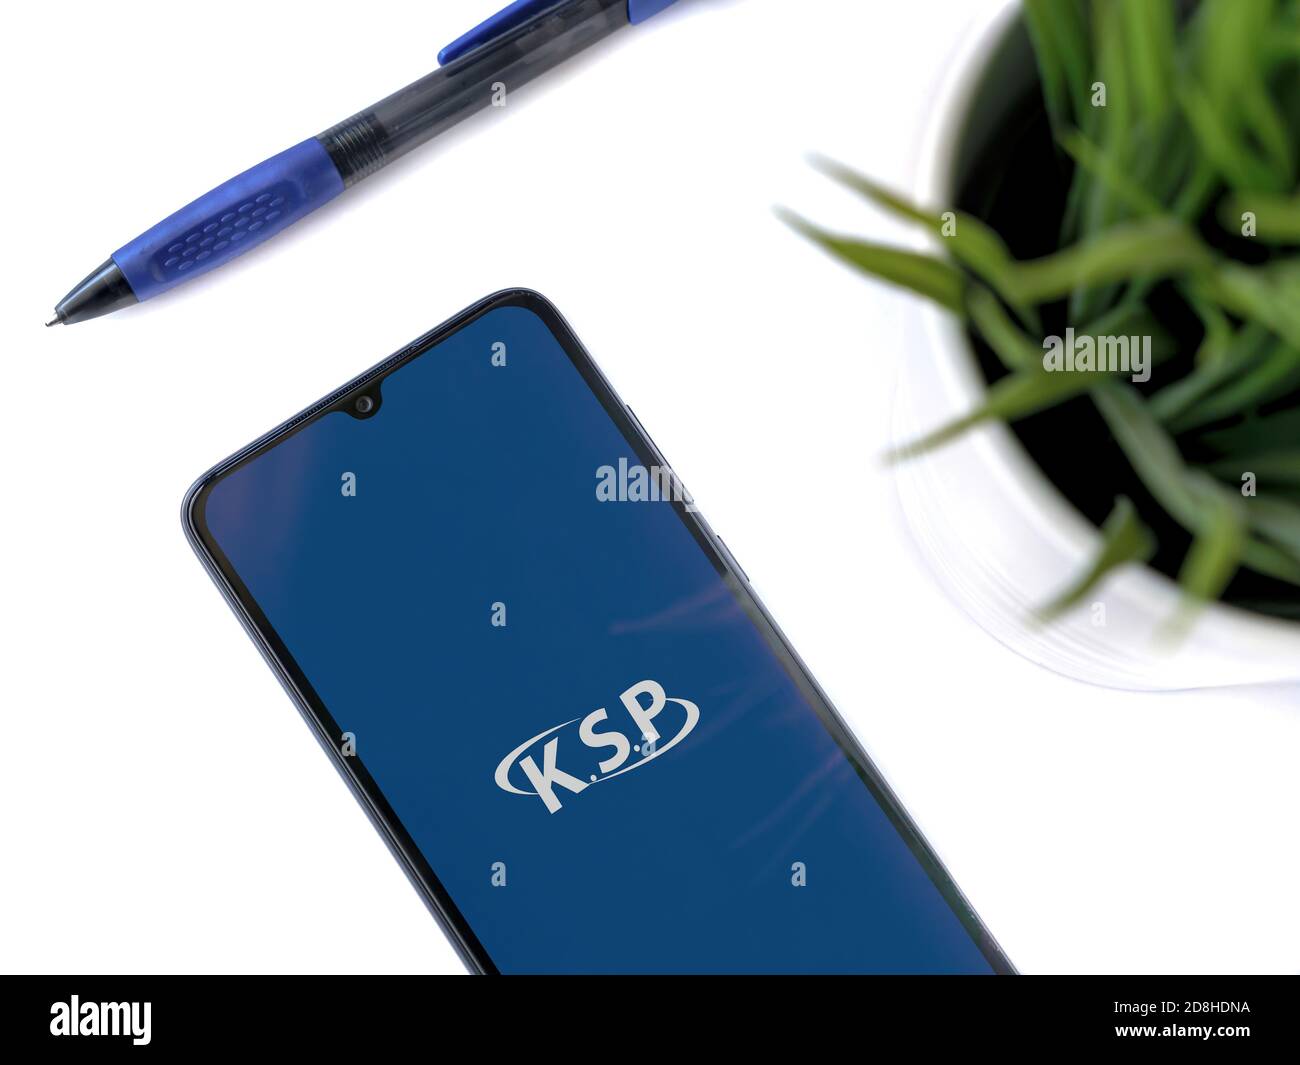 Lod, Israel - July 8, 2020: Modern minimalist office workspace with black mobile smartphone with KSP app launch screen with logo on white background. Stock Photo